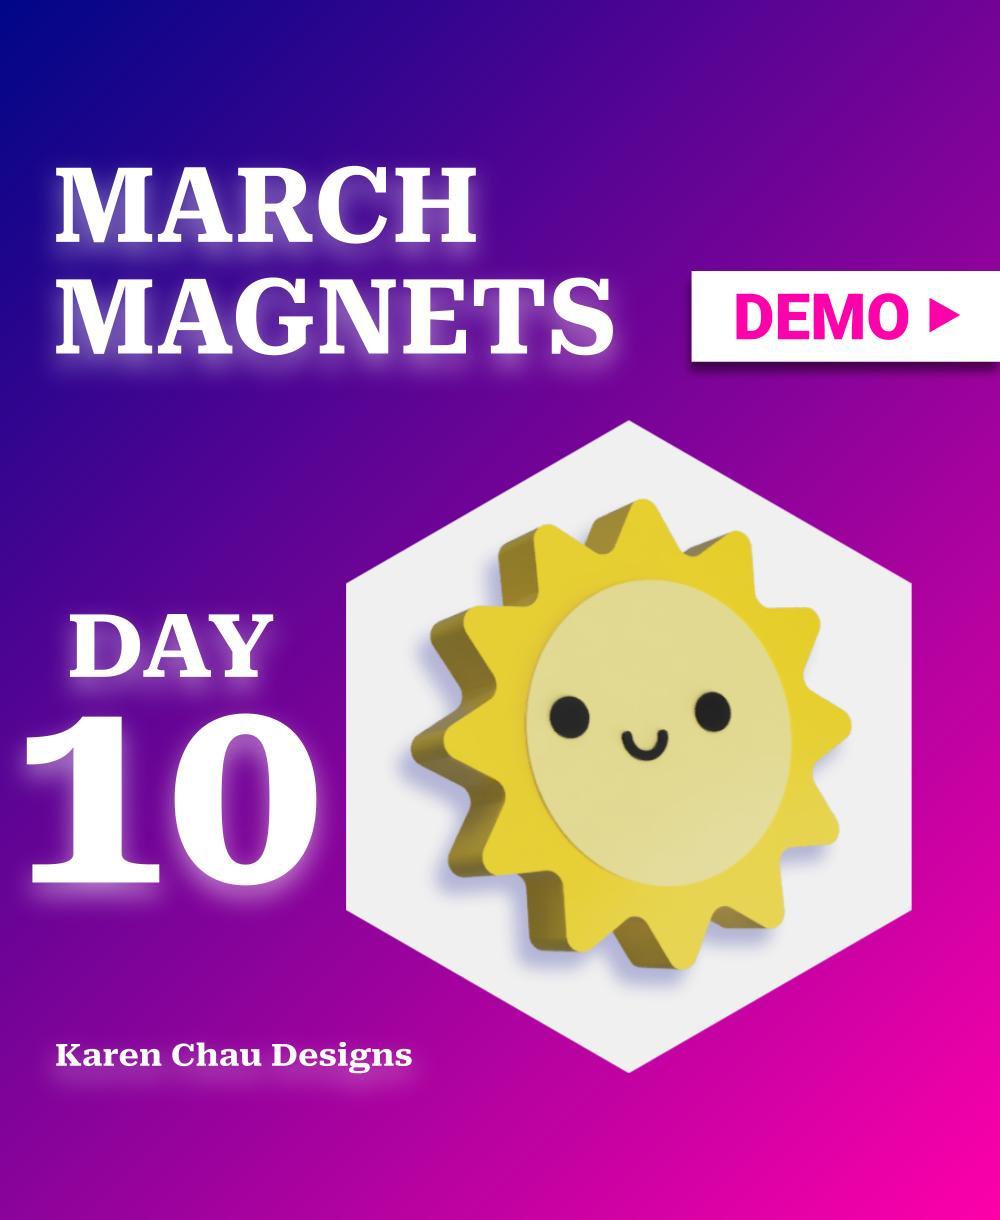 March Magnets - Day 10 #marchmagnets | Kawaii Sun Magnet 3d model